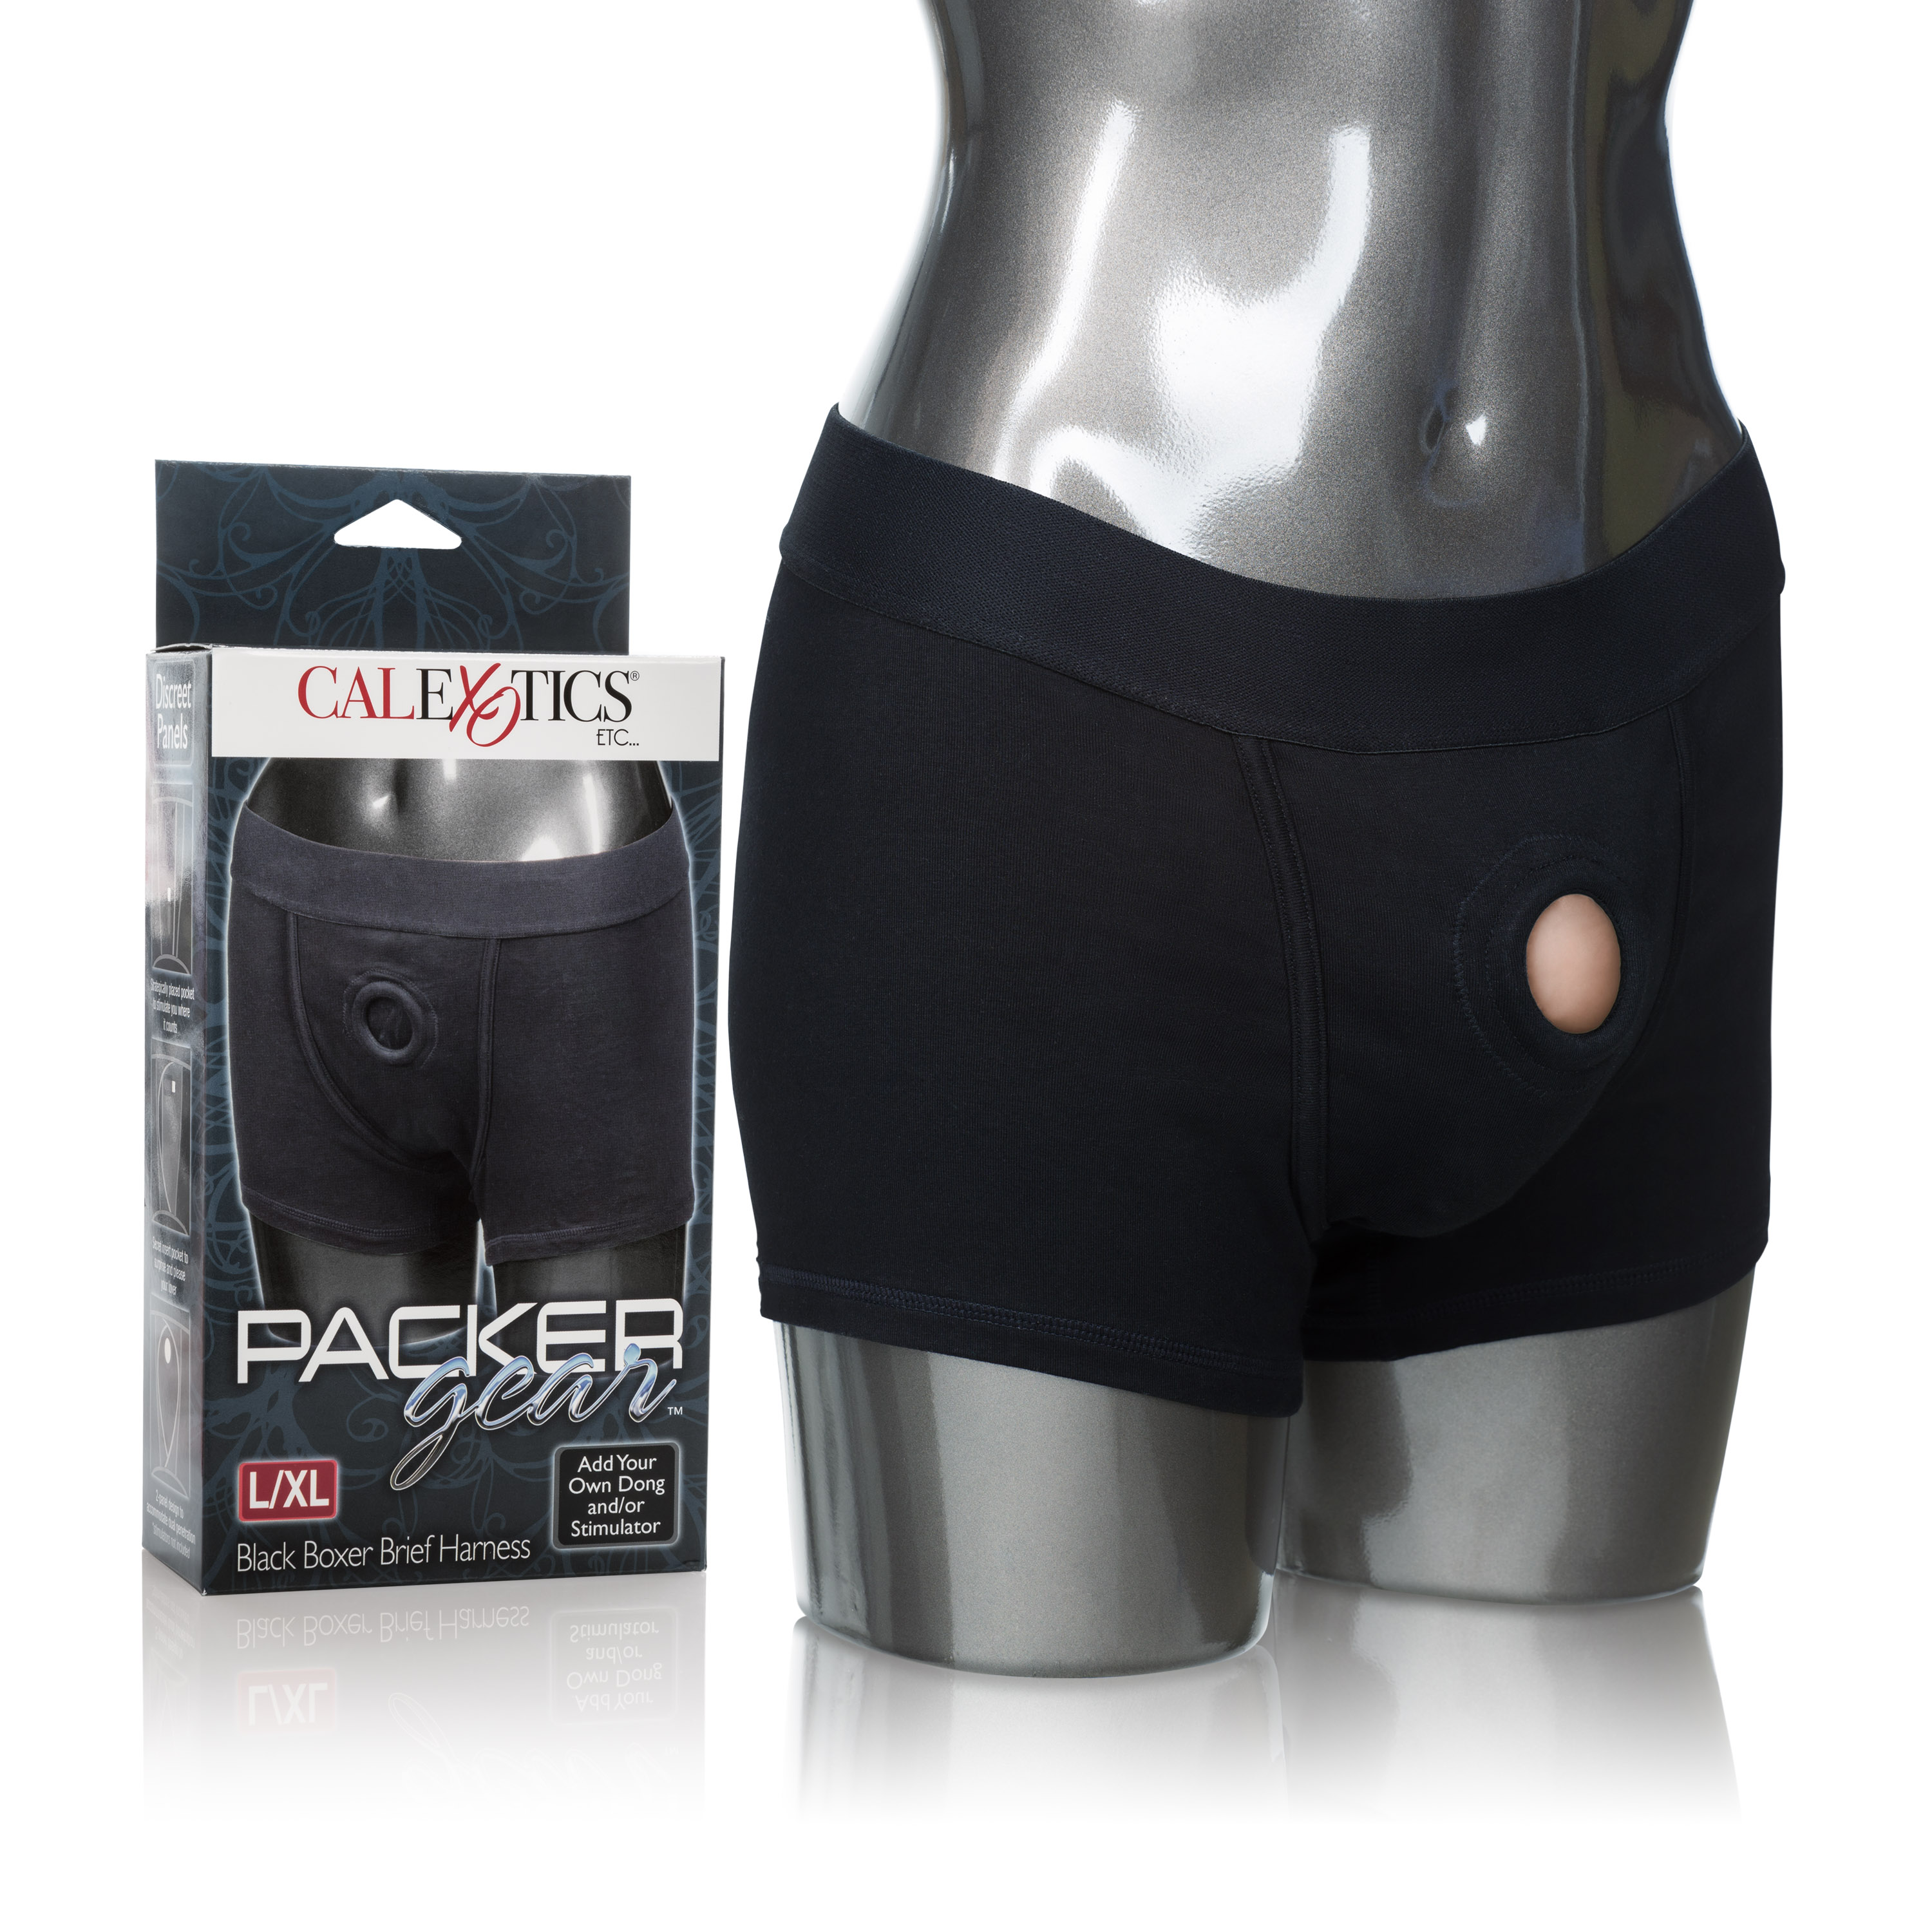 packer gear boxer brief harness largeextralarge black 